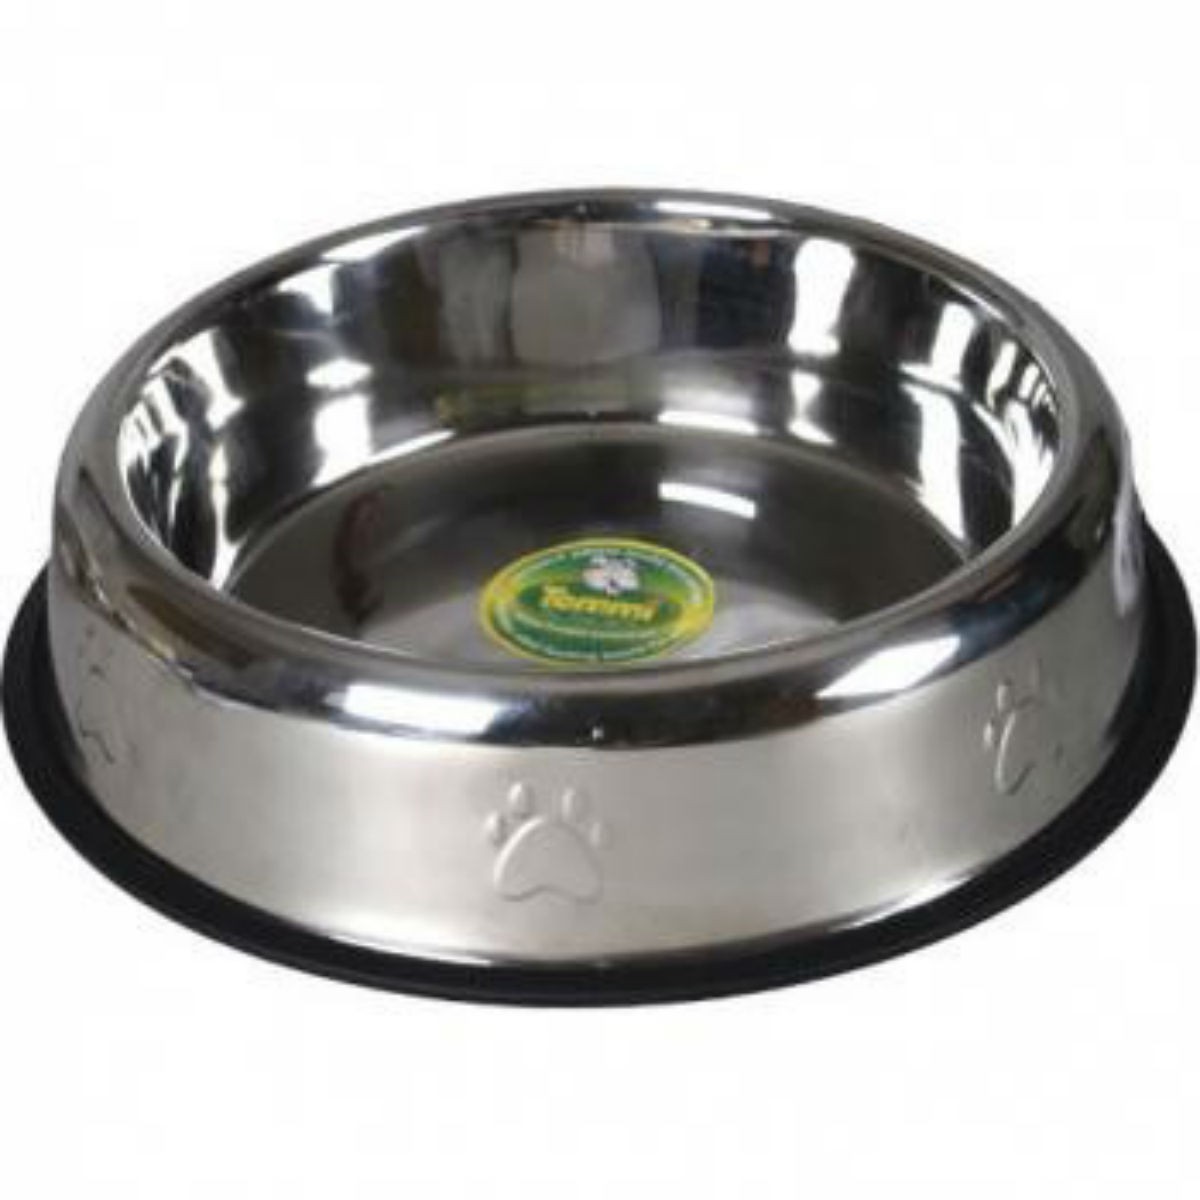 Stable stainless steel bowl, decorated with 2.8l